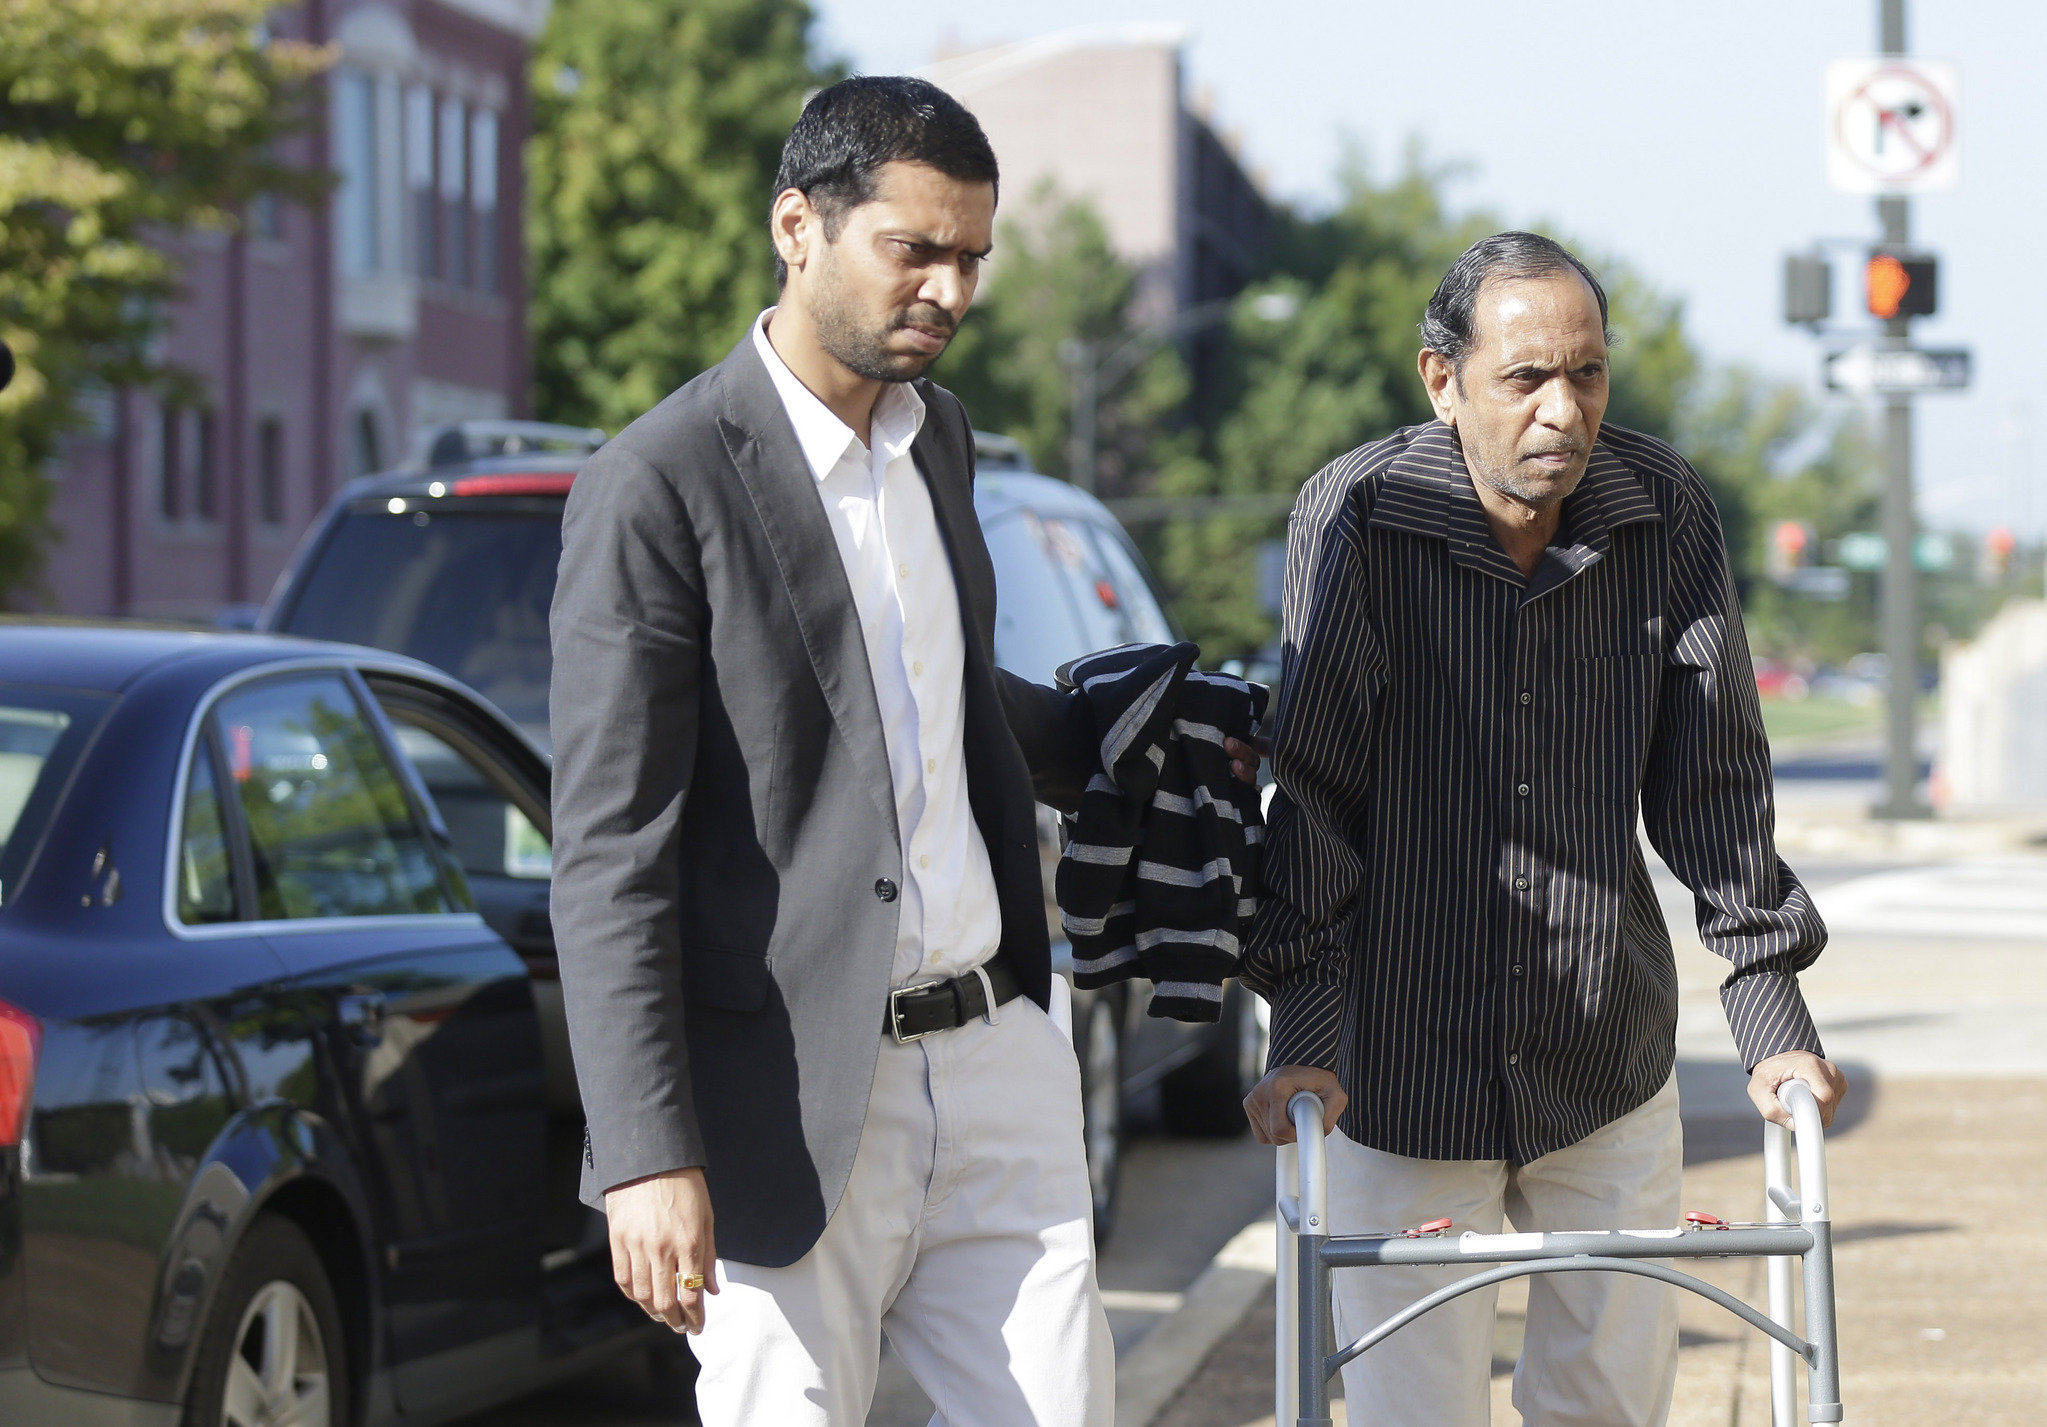 Sureshbhai Patel amends lawsuit against Eric Parker and City of Madison